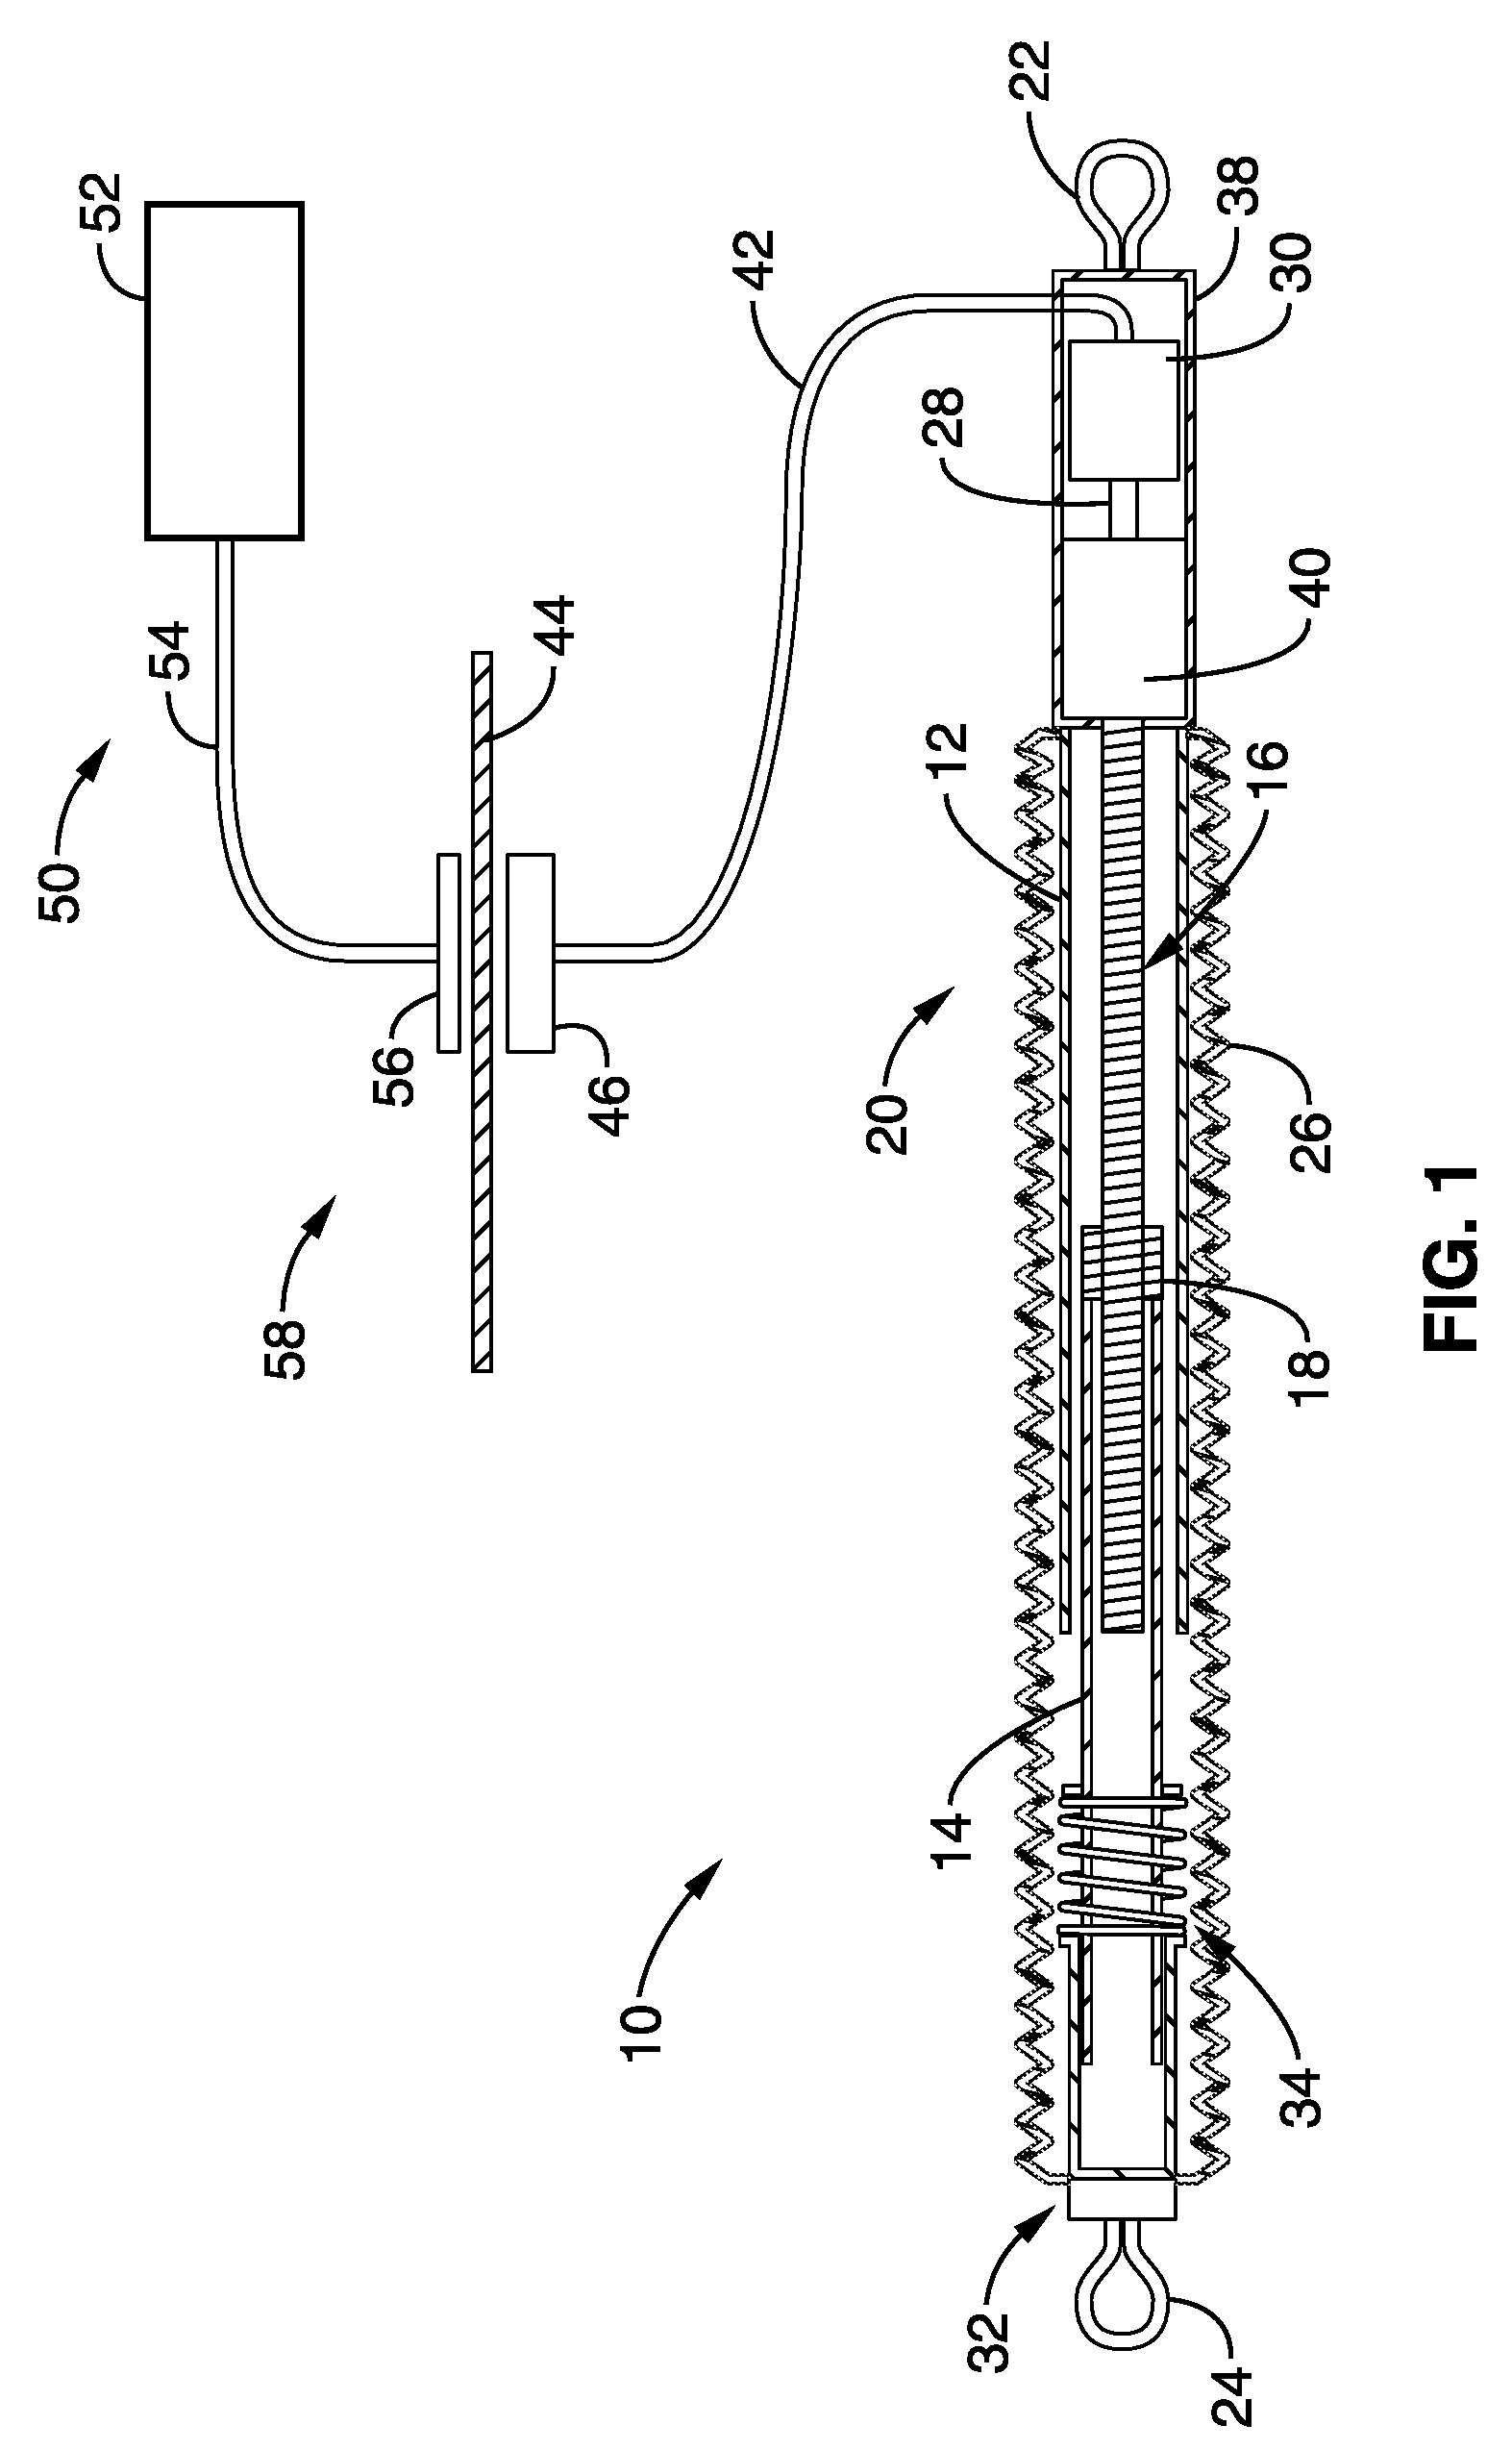 Apparatus and methods for alteration of anatomical features